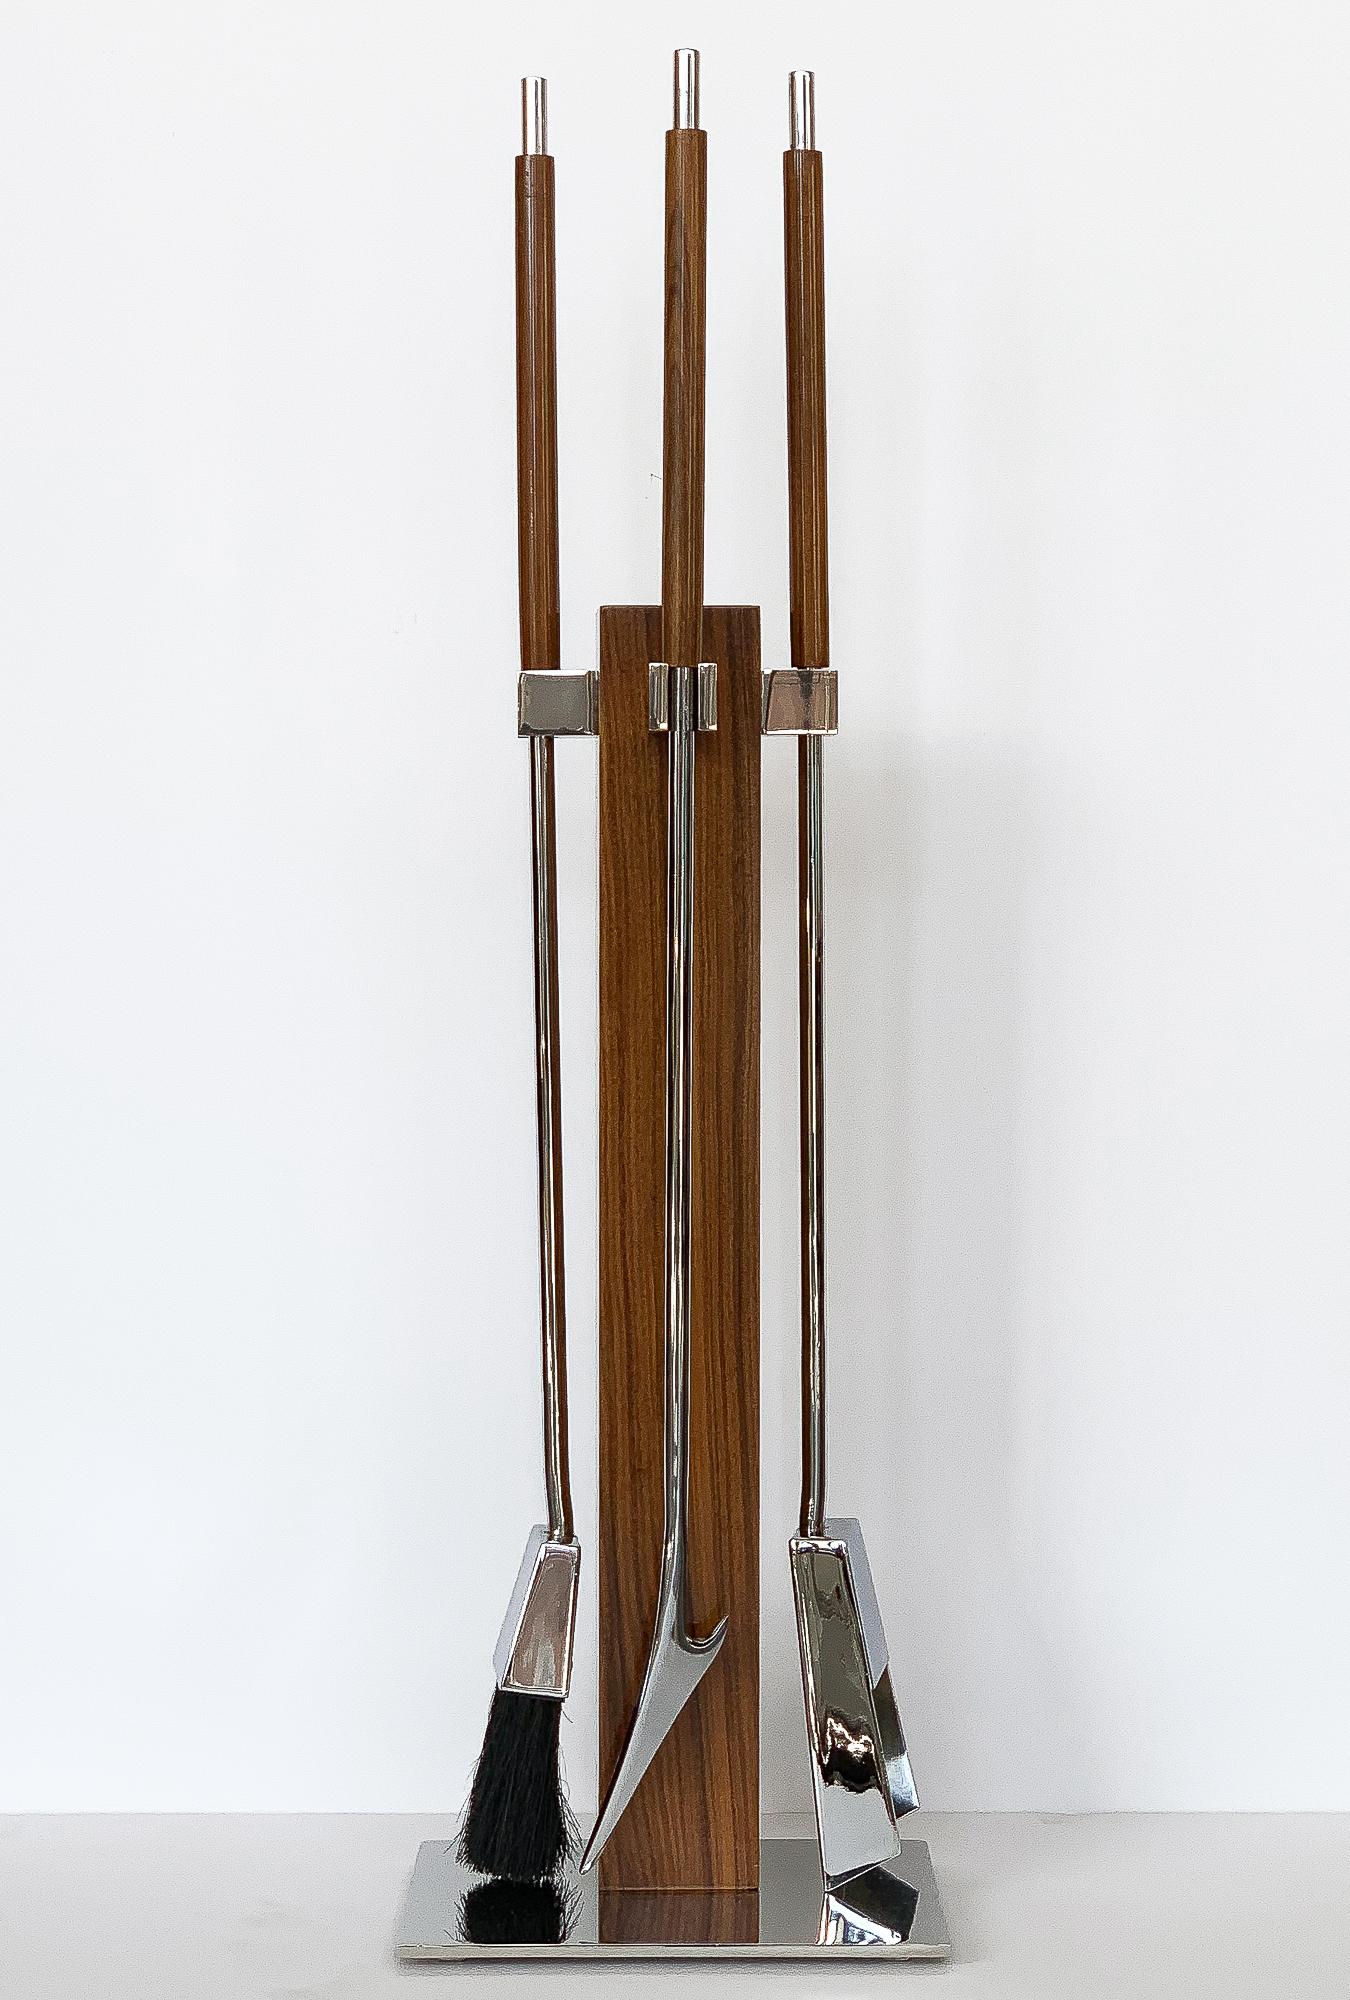 Rosewood and chrome fireplace tool set attributed to Danny Alessandro / Albrizzi, circa 1970s. Set includes the poker, shovel, broom and Stand. A rectangular chrome plate supports a 3.25